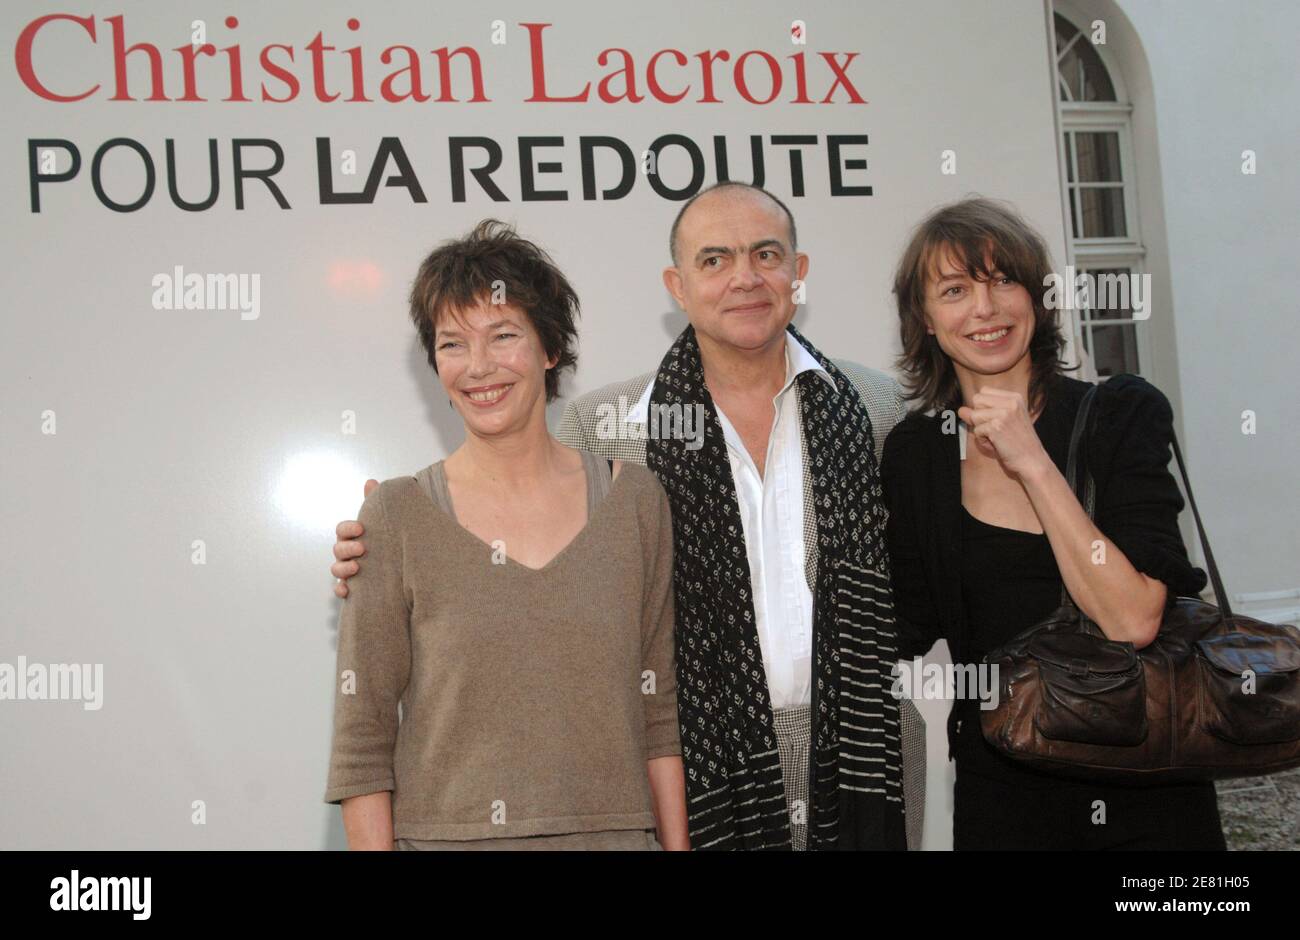 Photographer Kate Barry, daughter of actress and singer Jane Birkin, died today, december 2013, around 18:30 falling the fourth floor of her Paris apartment. Kate Barry was the